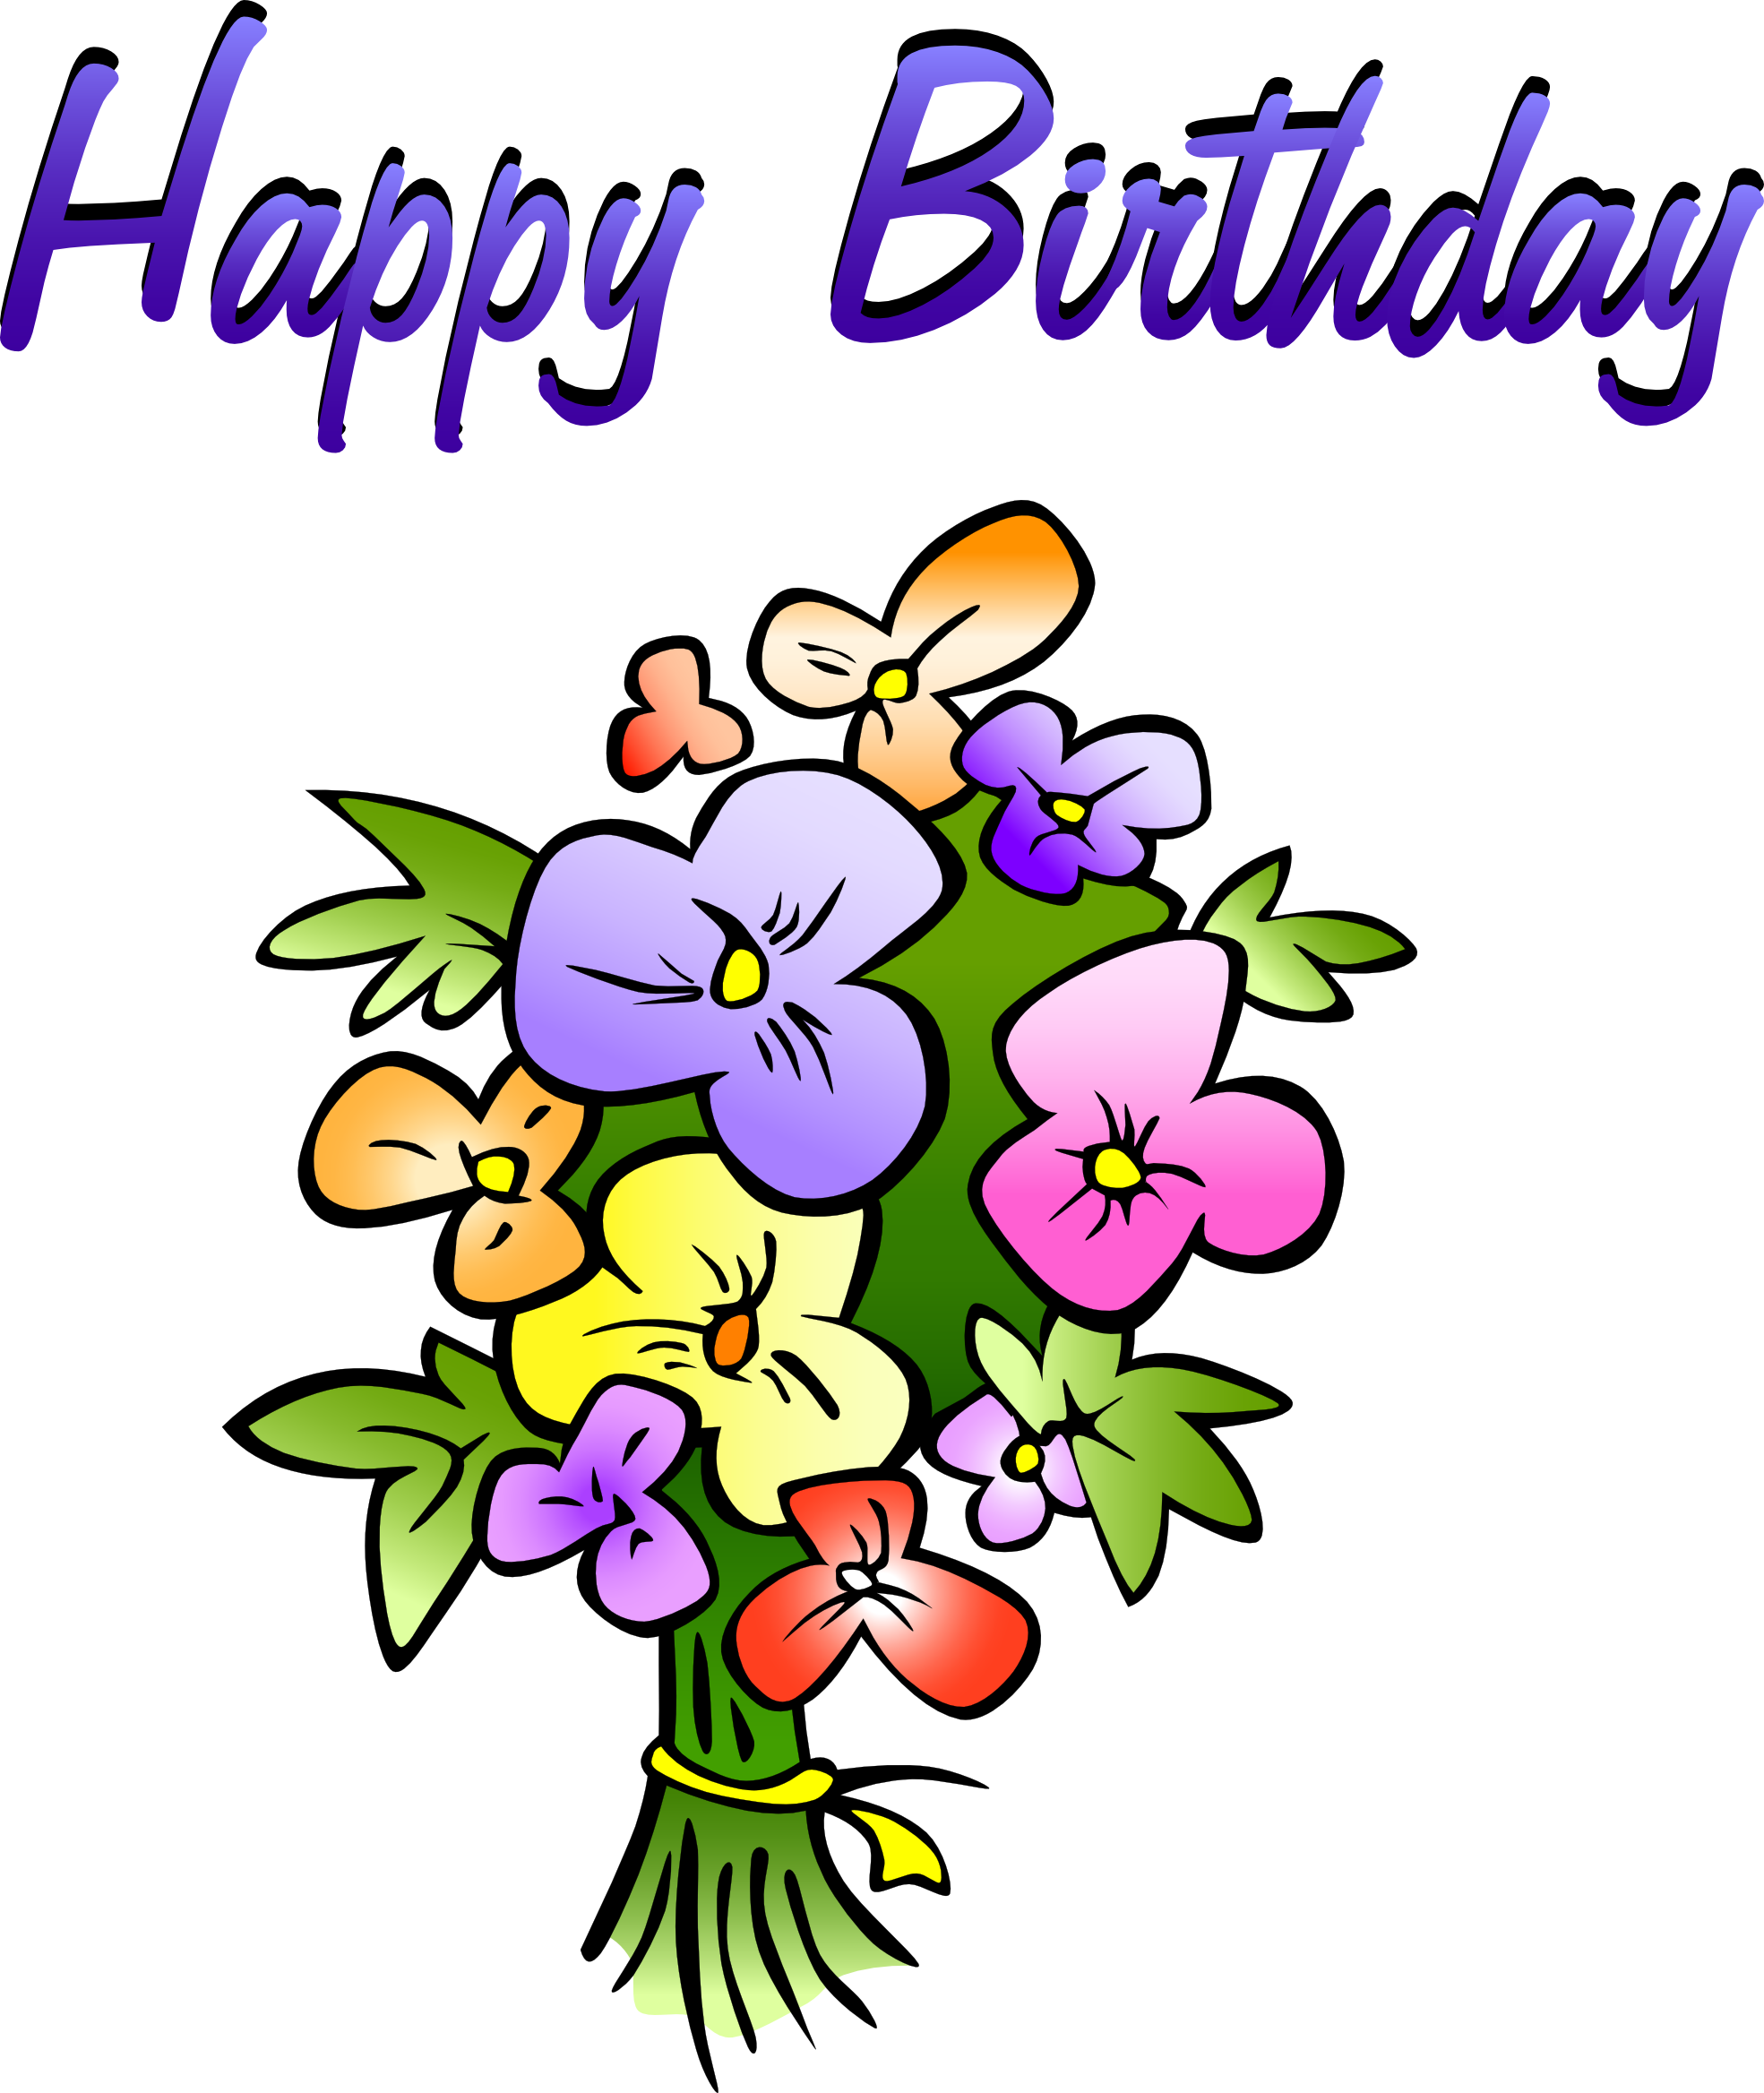 Happy Birthday Flowers Clipart | Clipart Panda - Free Clipart Images